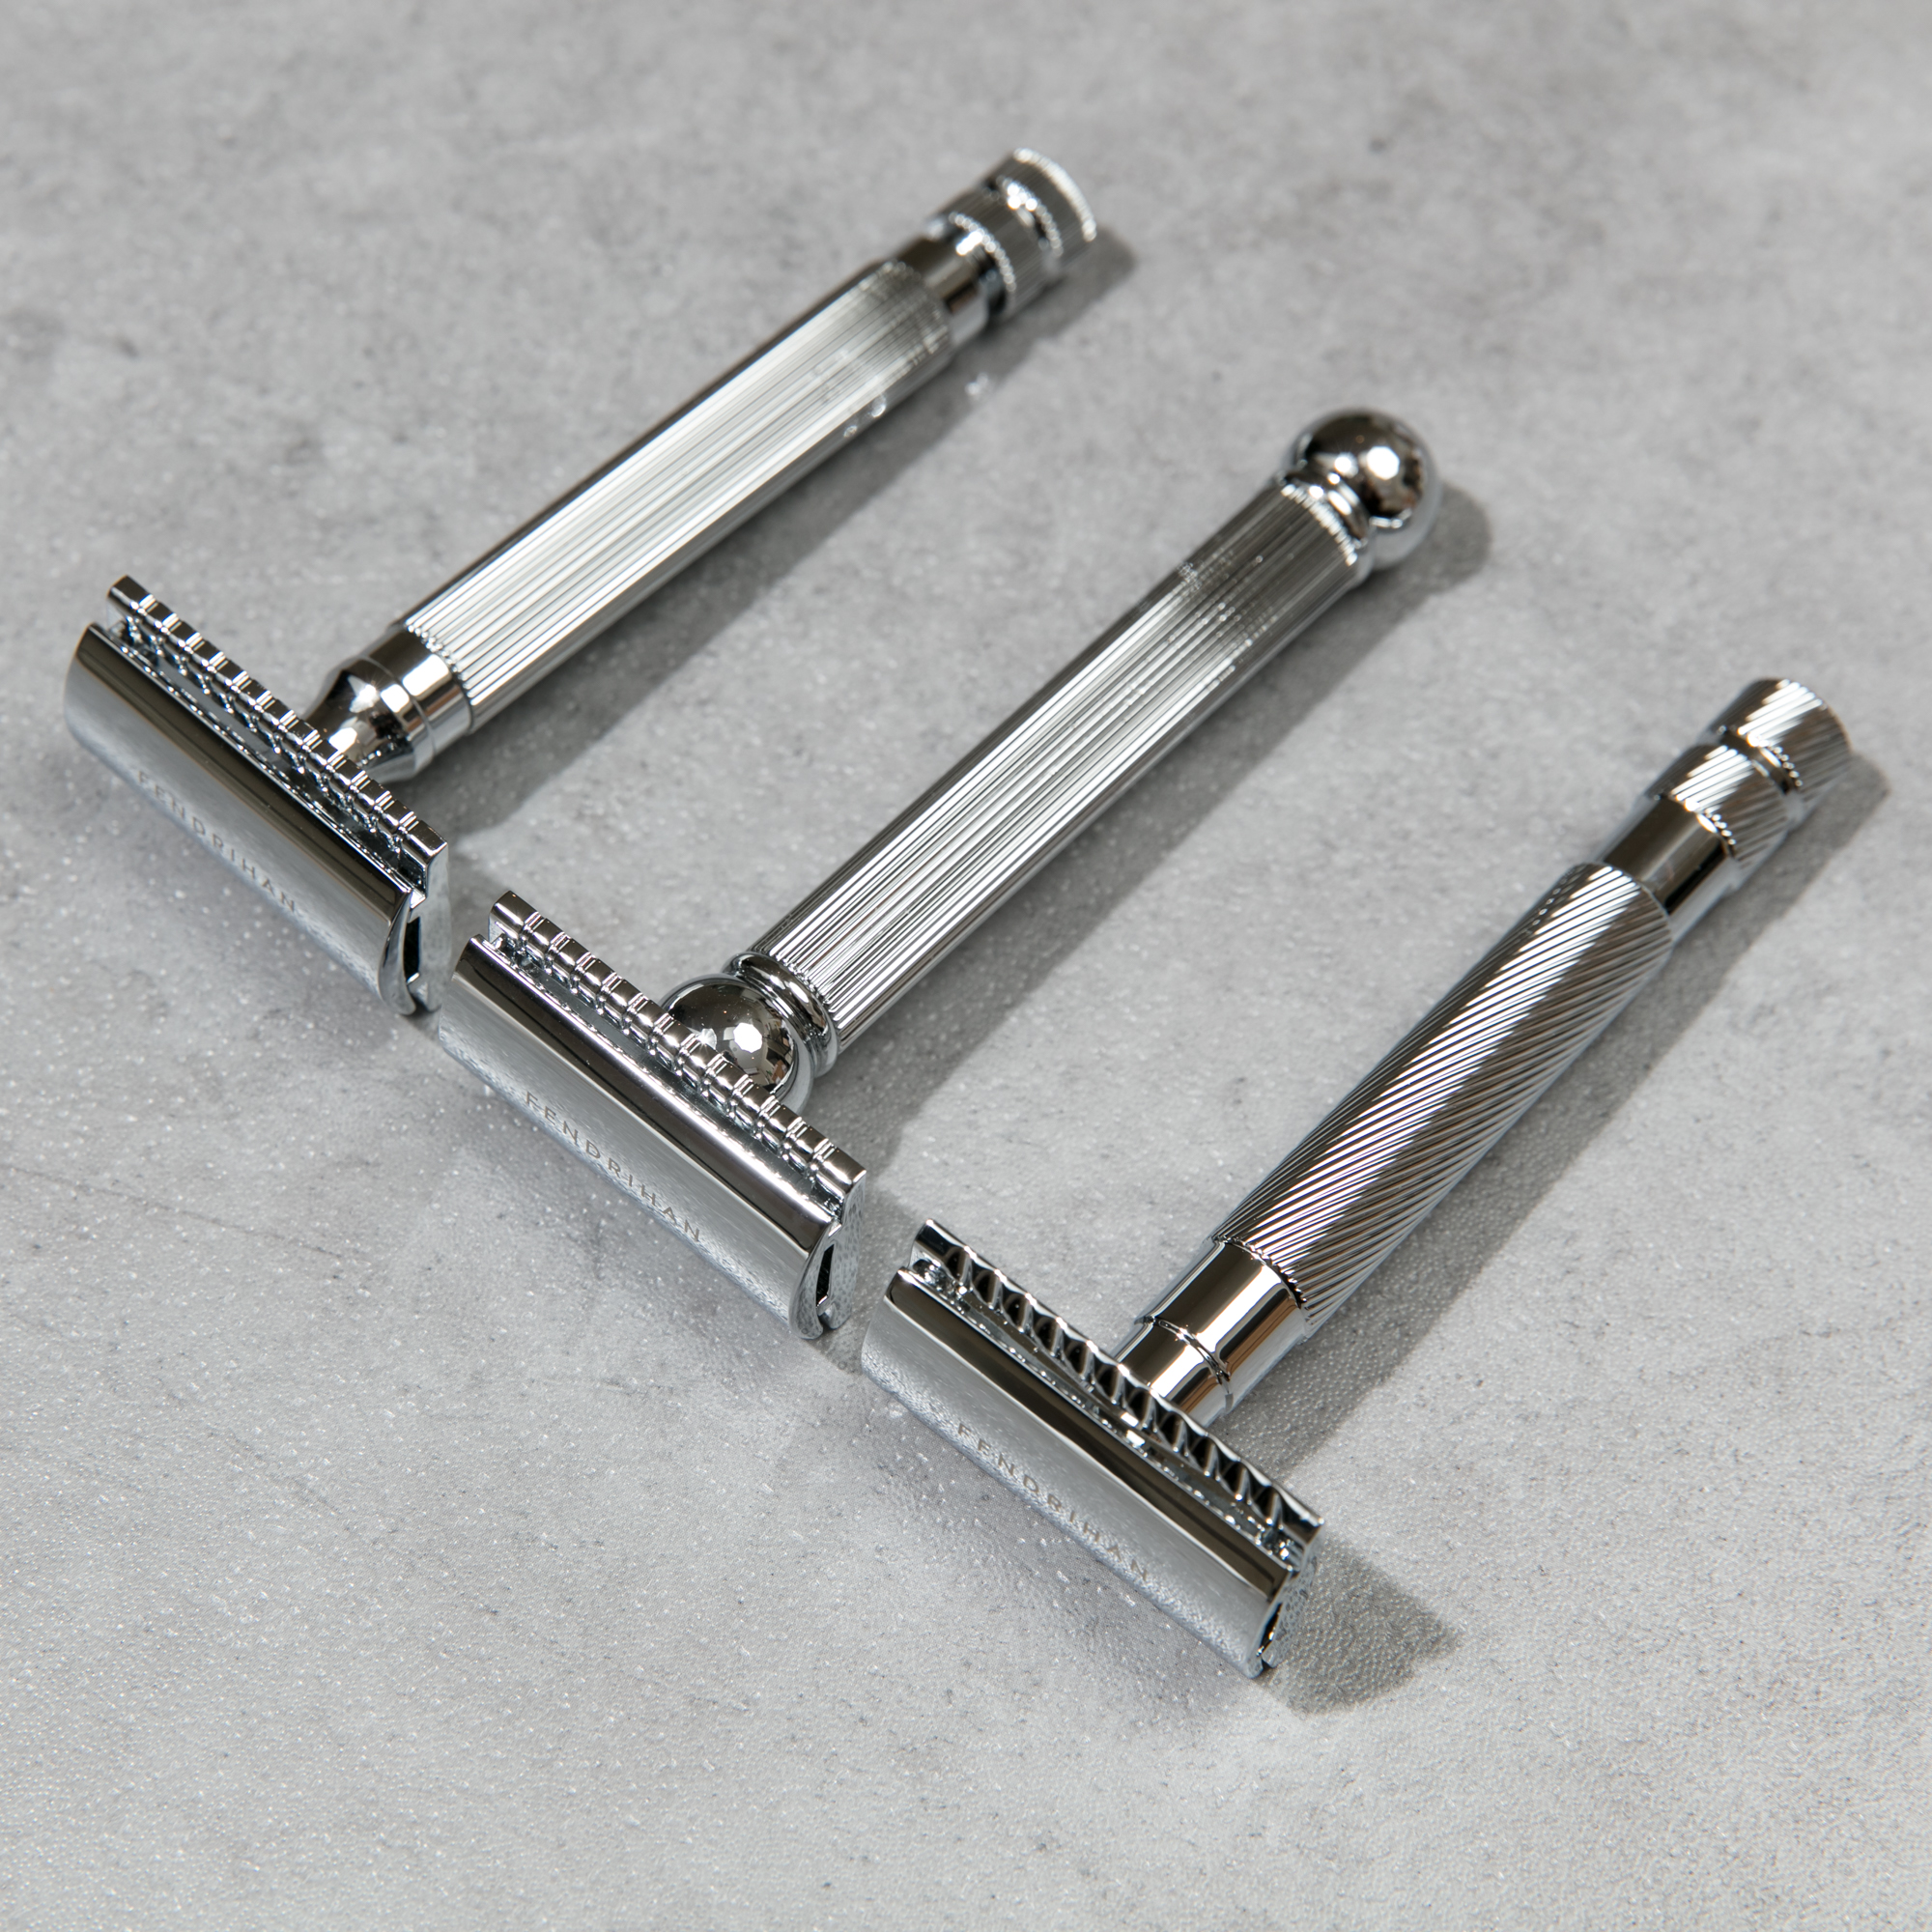 Are Safety Razors Really Worth the Cost?